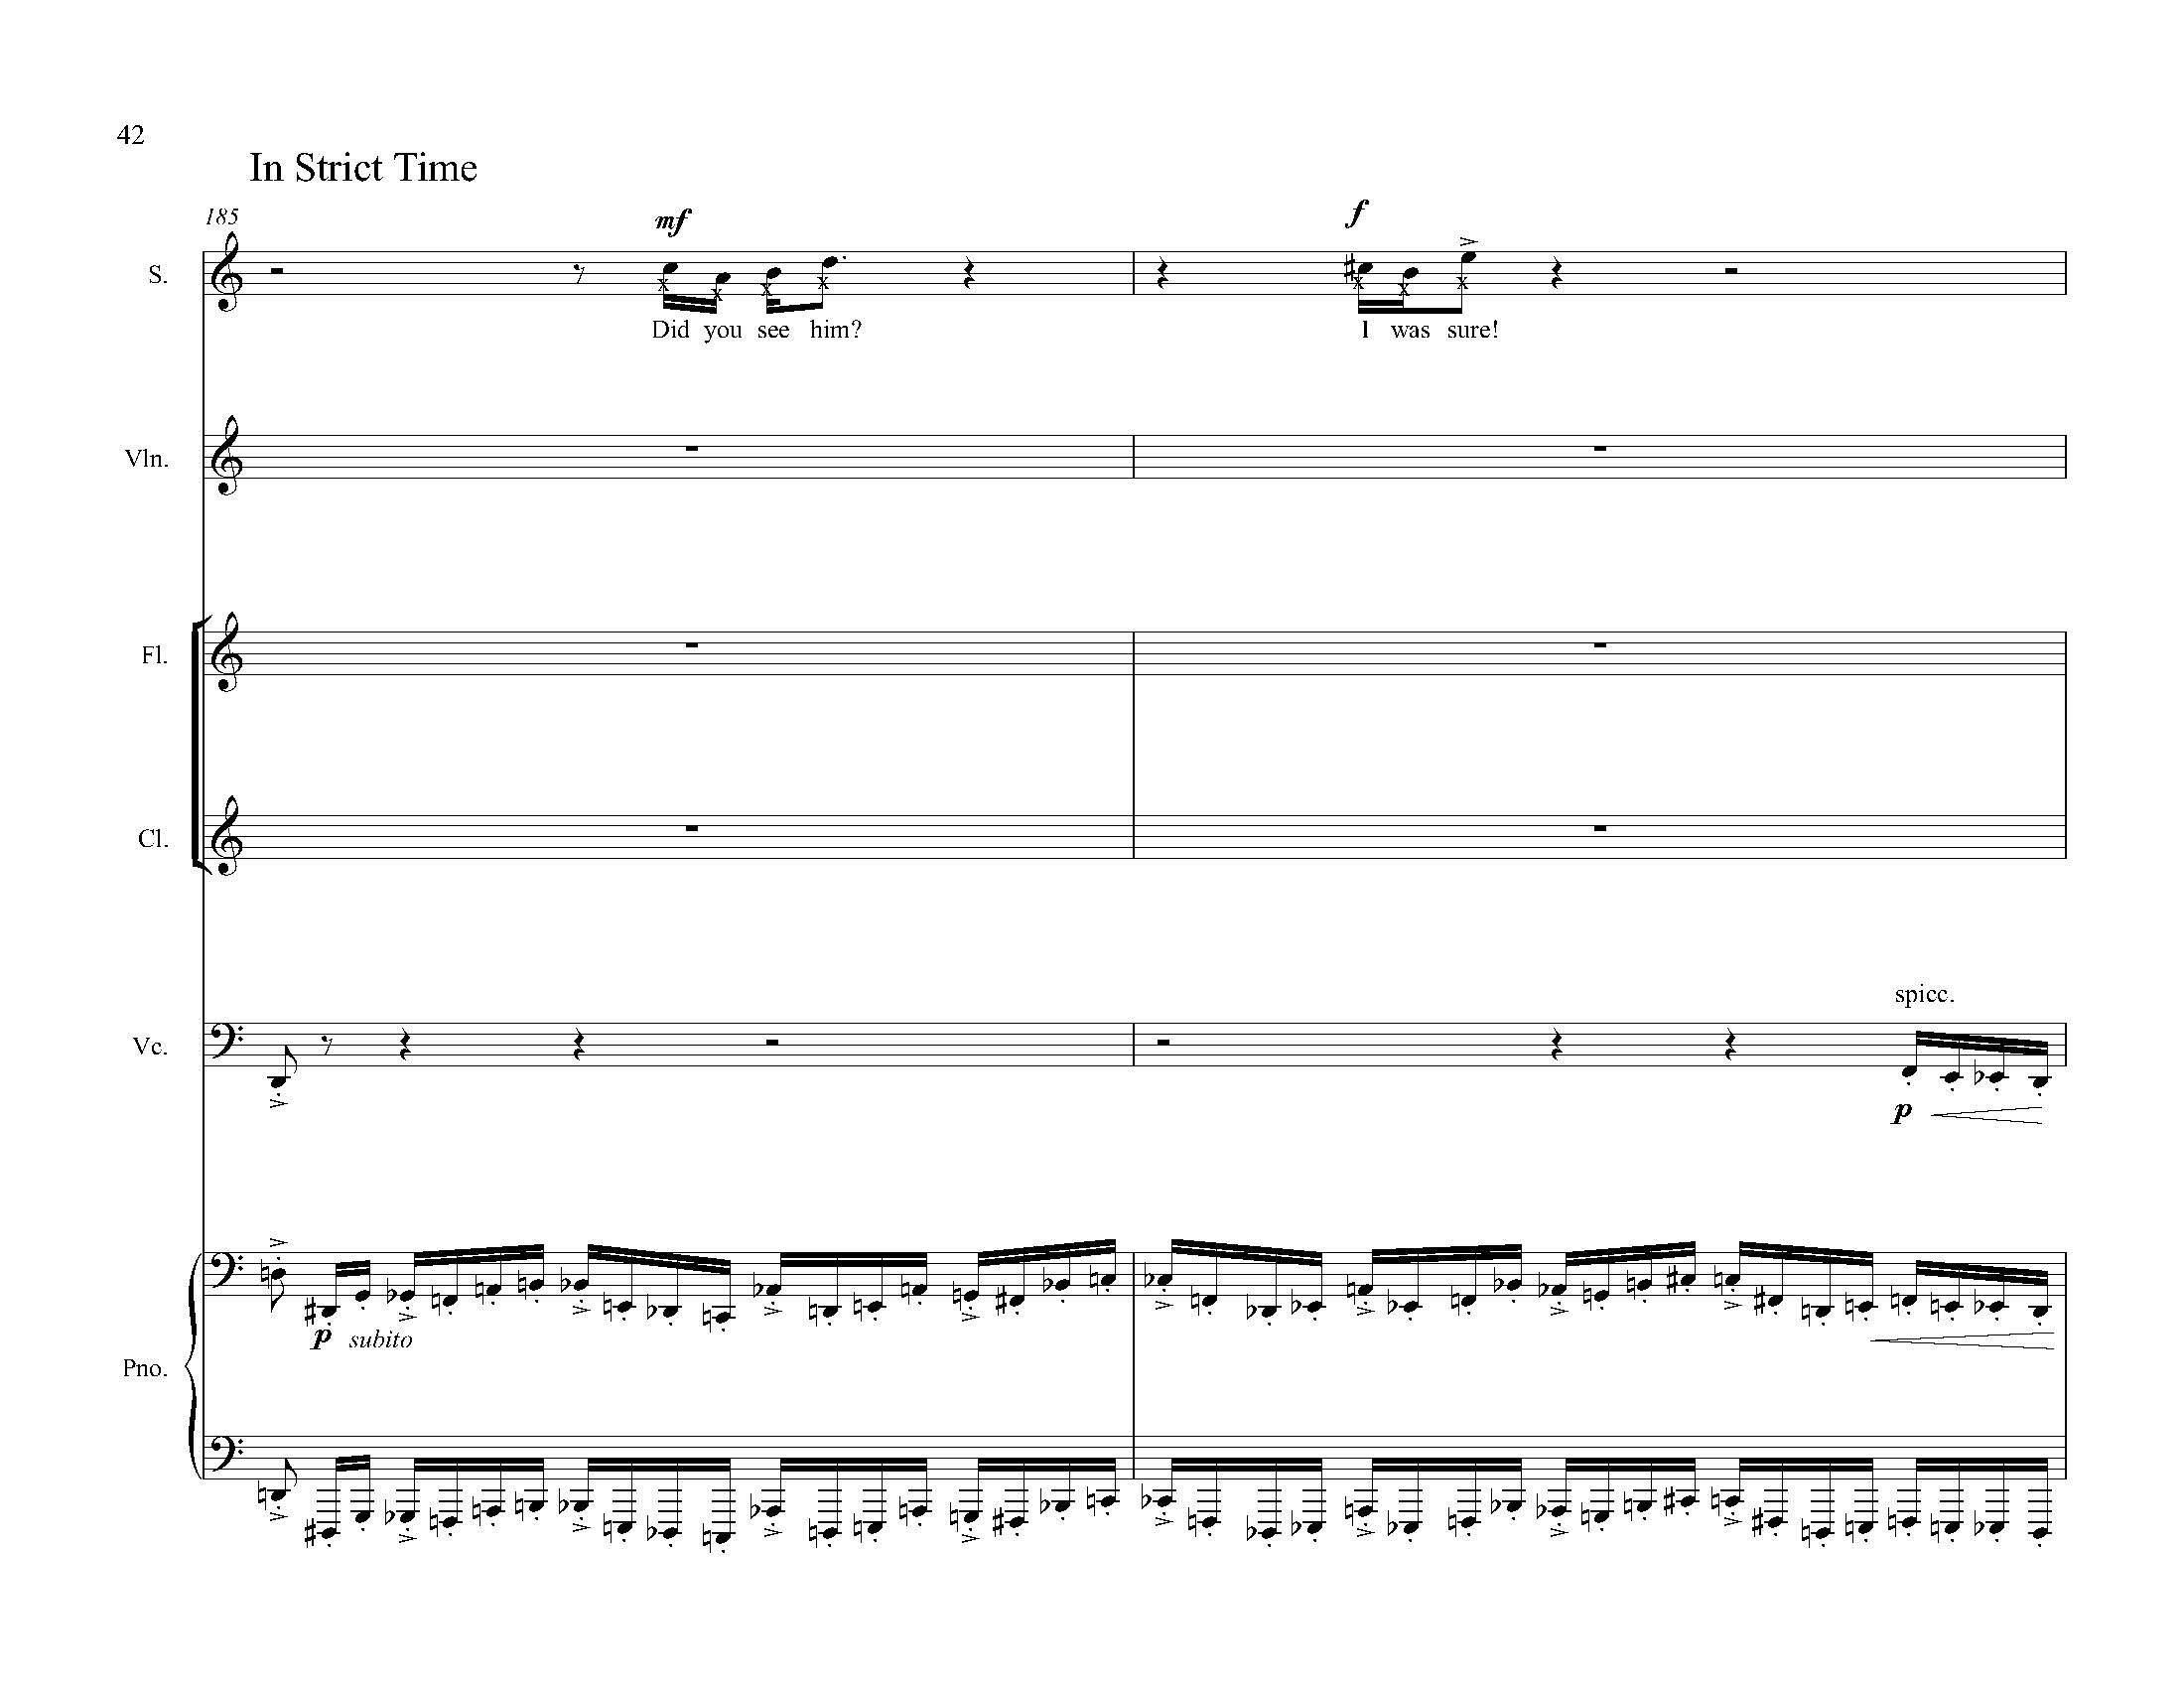 The Hill Wife - Complete Score_Page_050.jpg